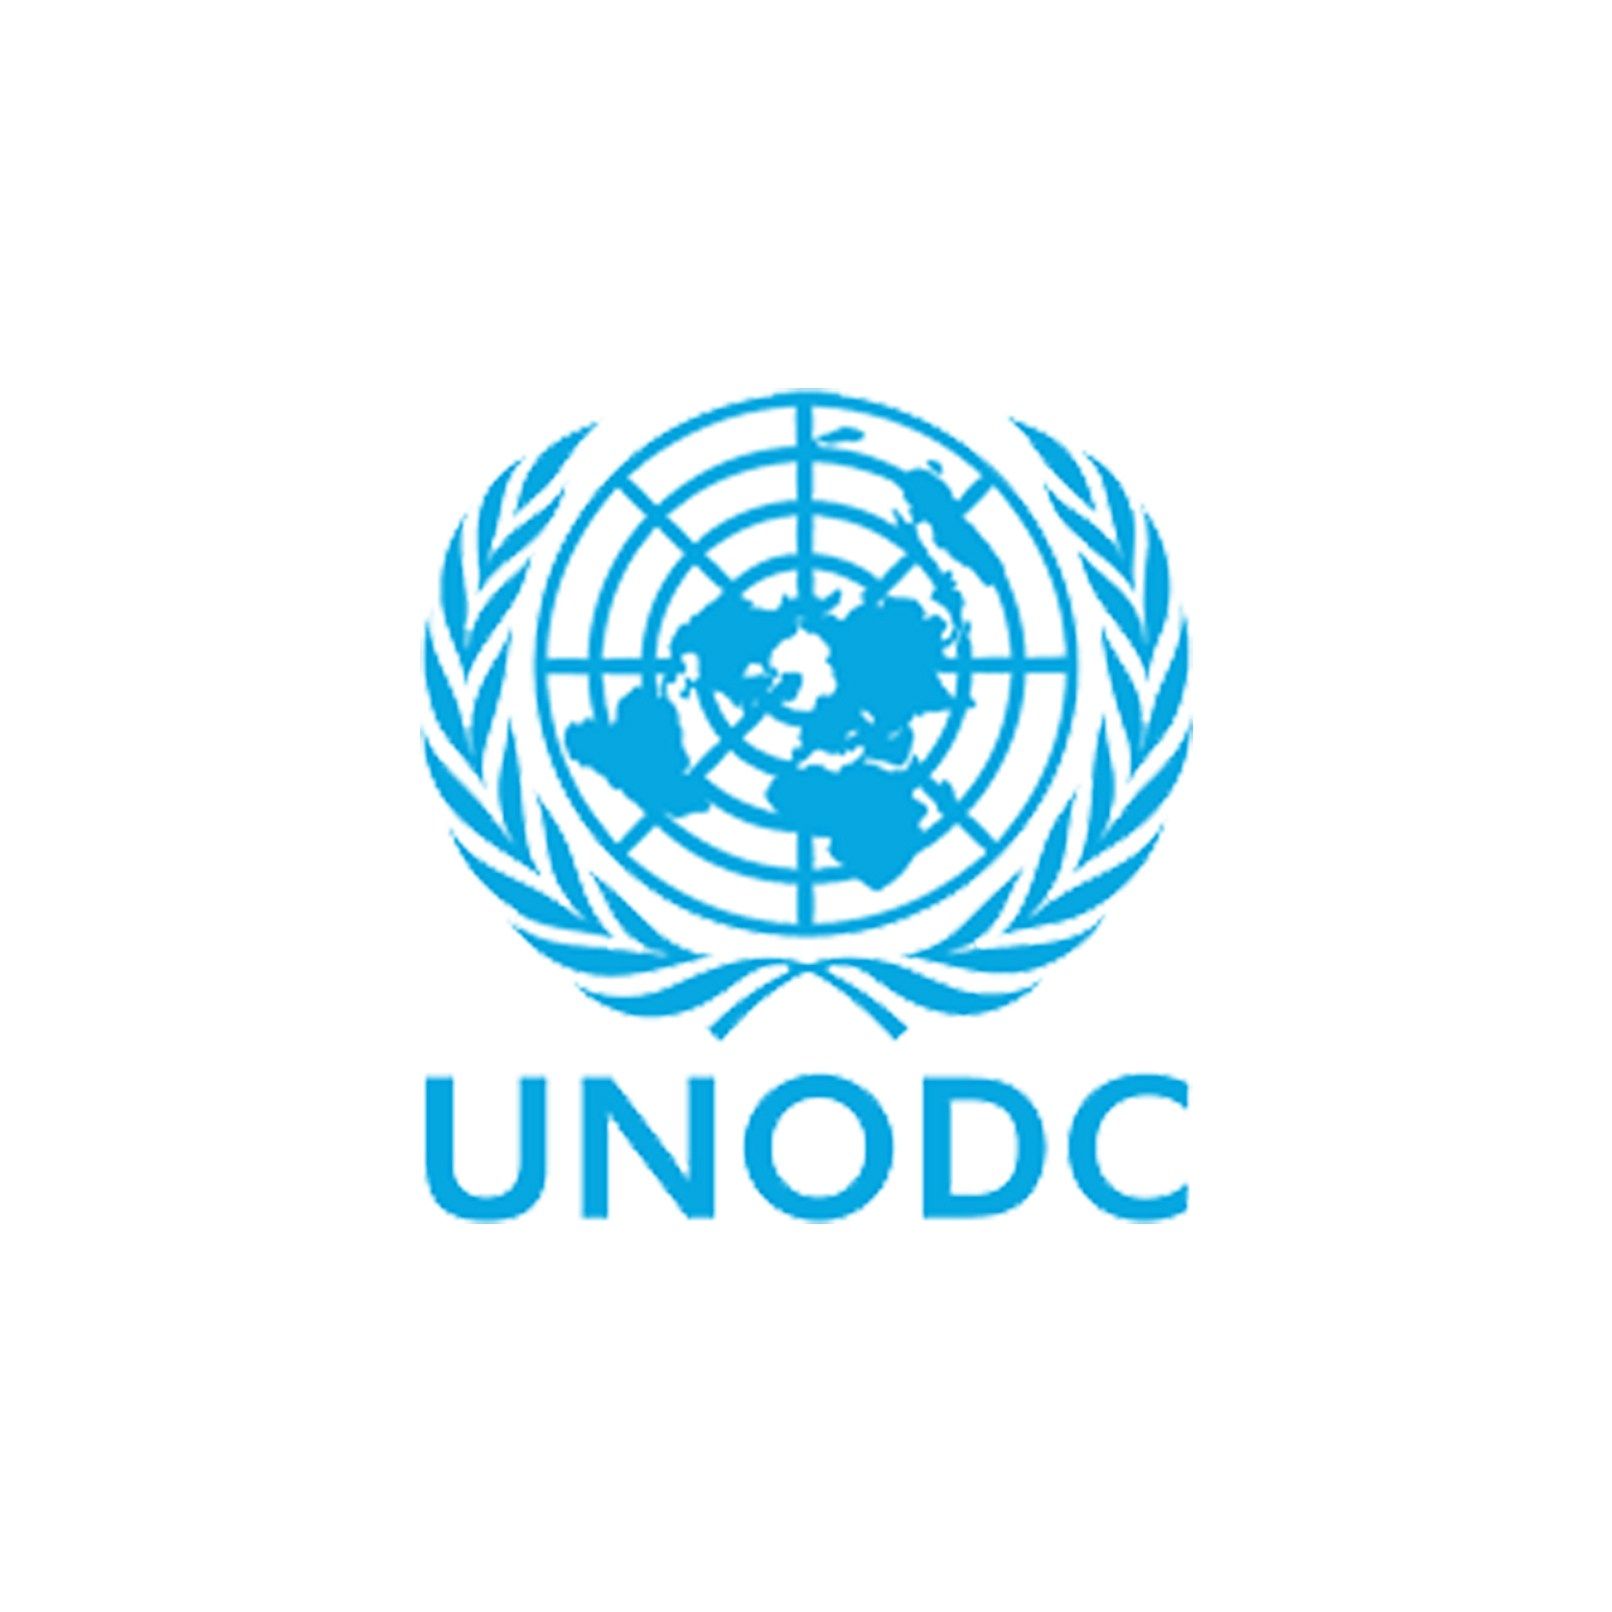 UNODC - United Nations Office on Drugs and Crime